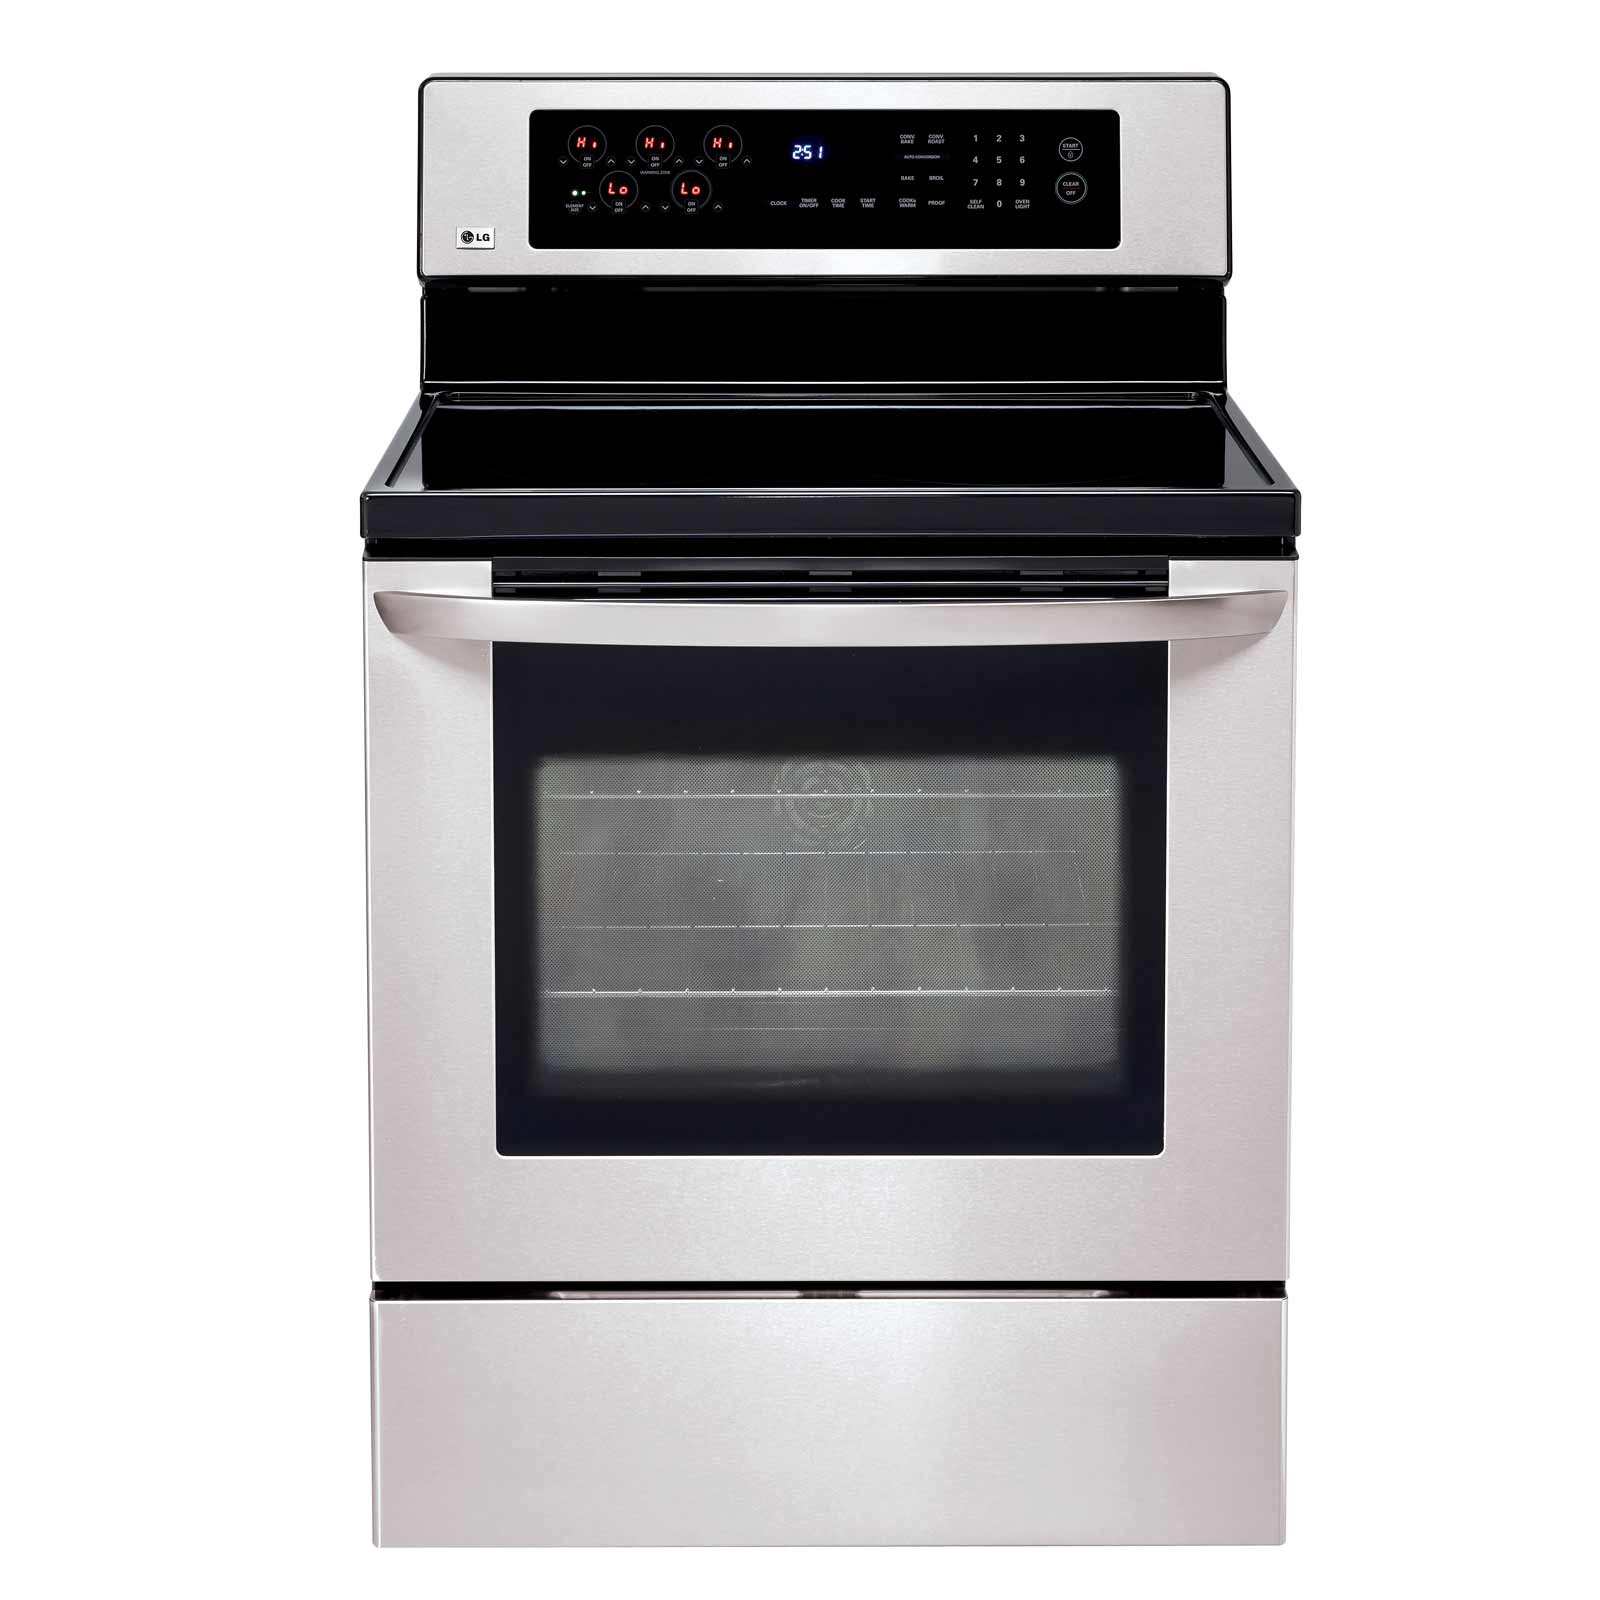 Best electric stove oven